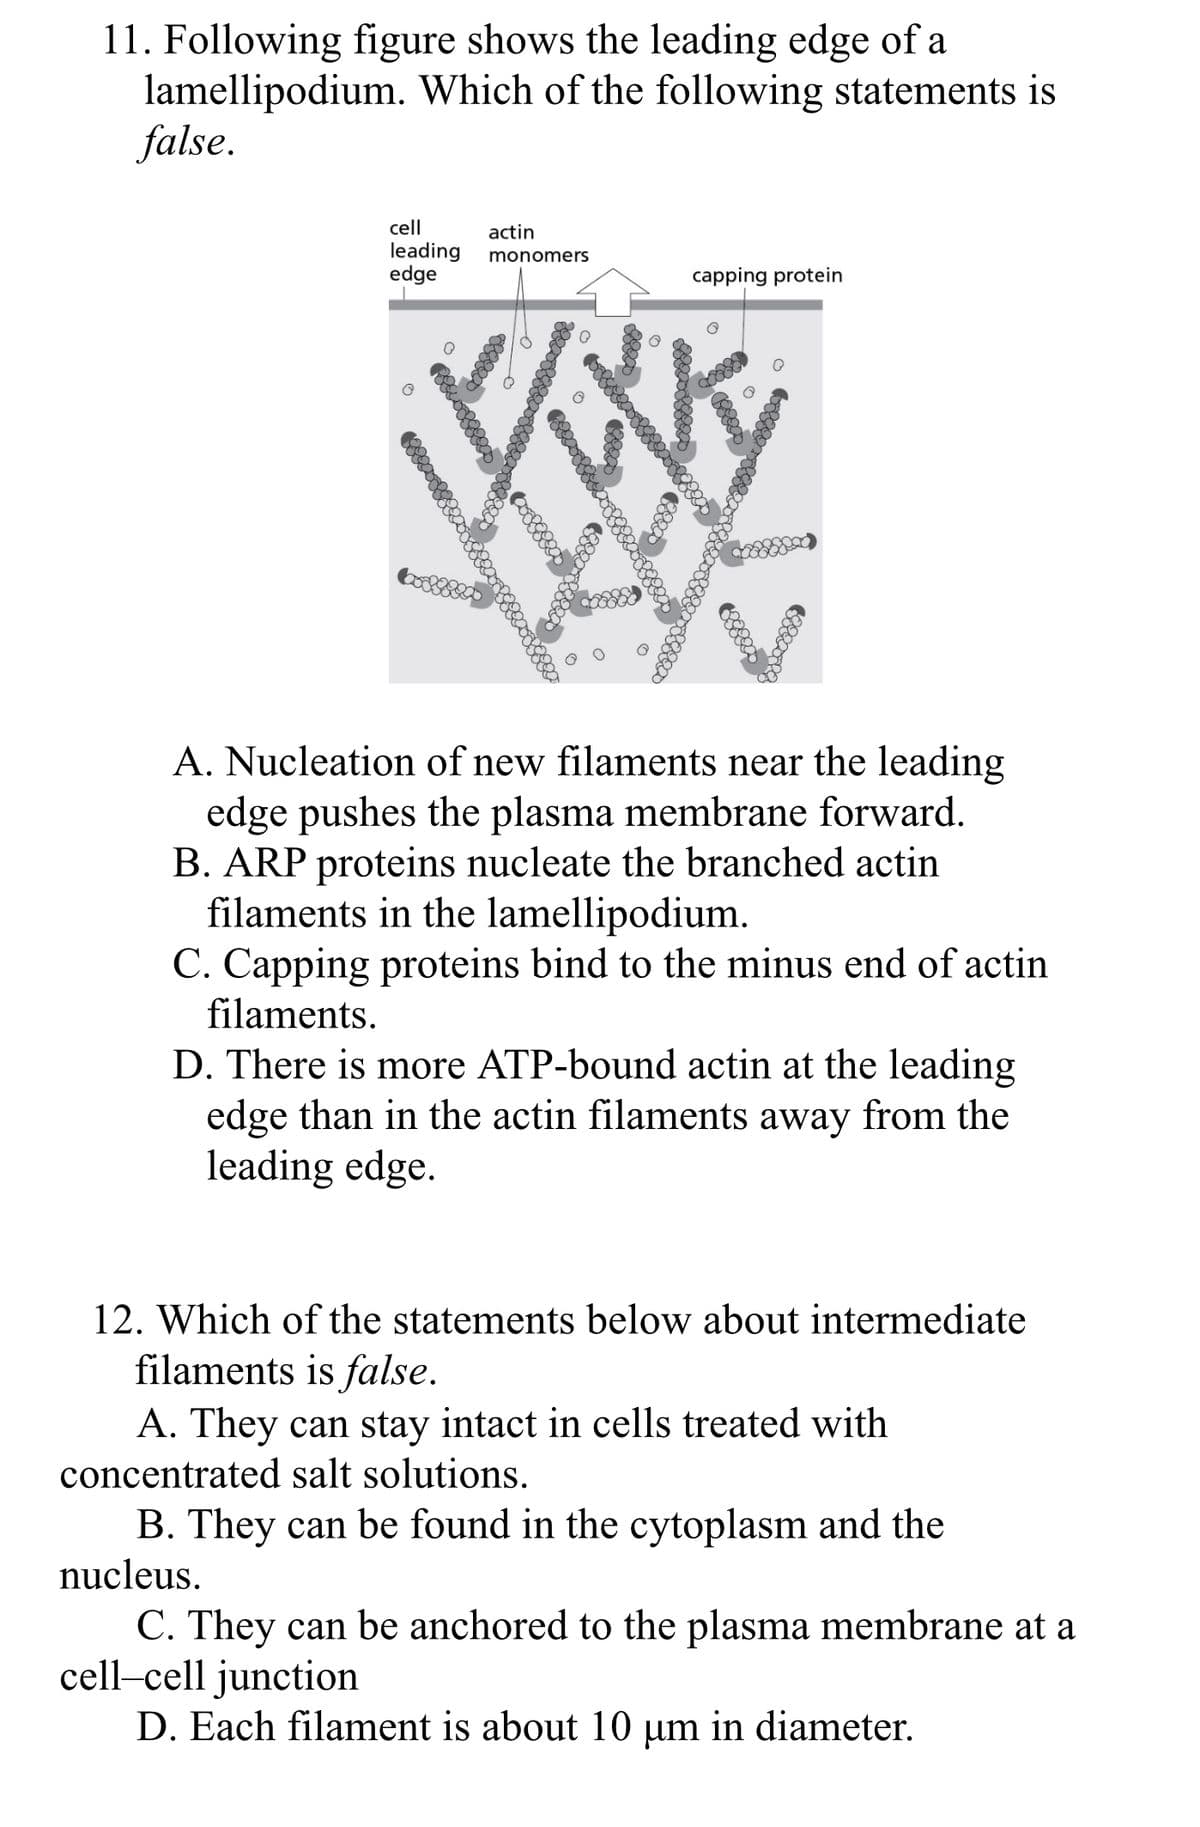 11. Following figure shows the leading edge of a
lamellipodium. Which of the following statements is
false.
cell
actin
leading
edge
monomers
capping protein
A. Nucleation of new filaments near the leading
edge pushes the plasma membrane forward.
B. ARP proteins nucleate the branched actin
filaments in the lamellipodium.
C. Capping proteins bind to the minus end of actin
filaments.
D. There is more ATP-bound actin at the leading
edge than in the actin filaments away from the
leading edge.
12. Which of the statements below about intermediate
filaments is false.
A. They can stay intact in cells treated with
concentrated salt solutions.
B. They can be found in the cytoplasm and the
nucleus.
C. They can be anchored to the plasma membrane at a
cell-cell junction
D. Each filament is about 10 um in diameter.
